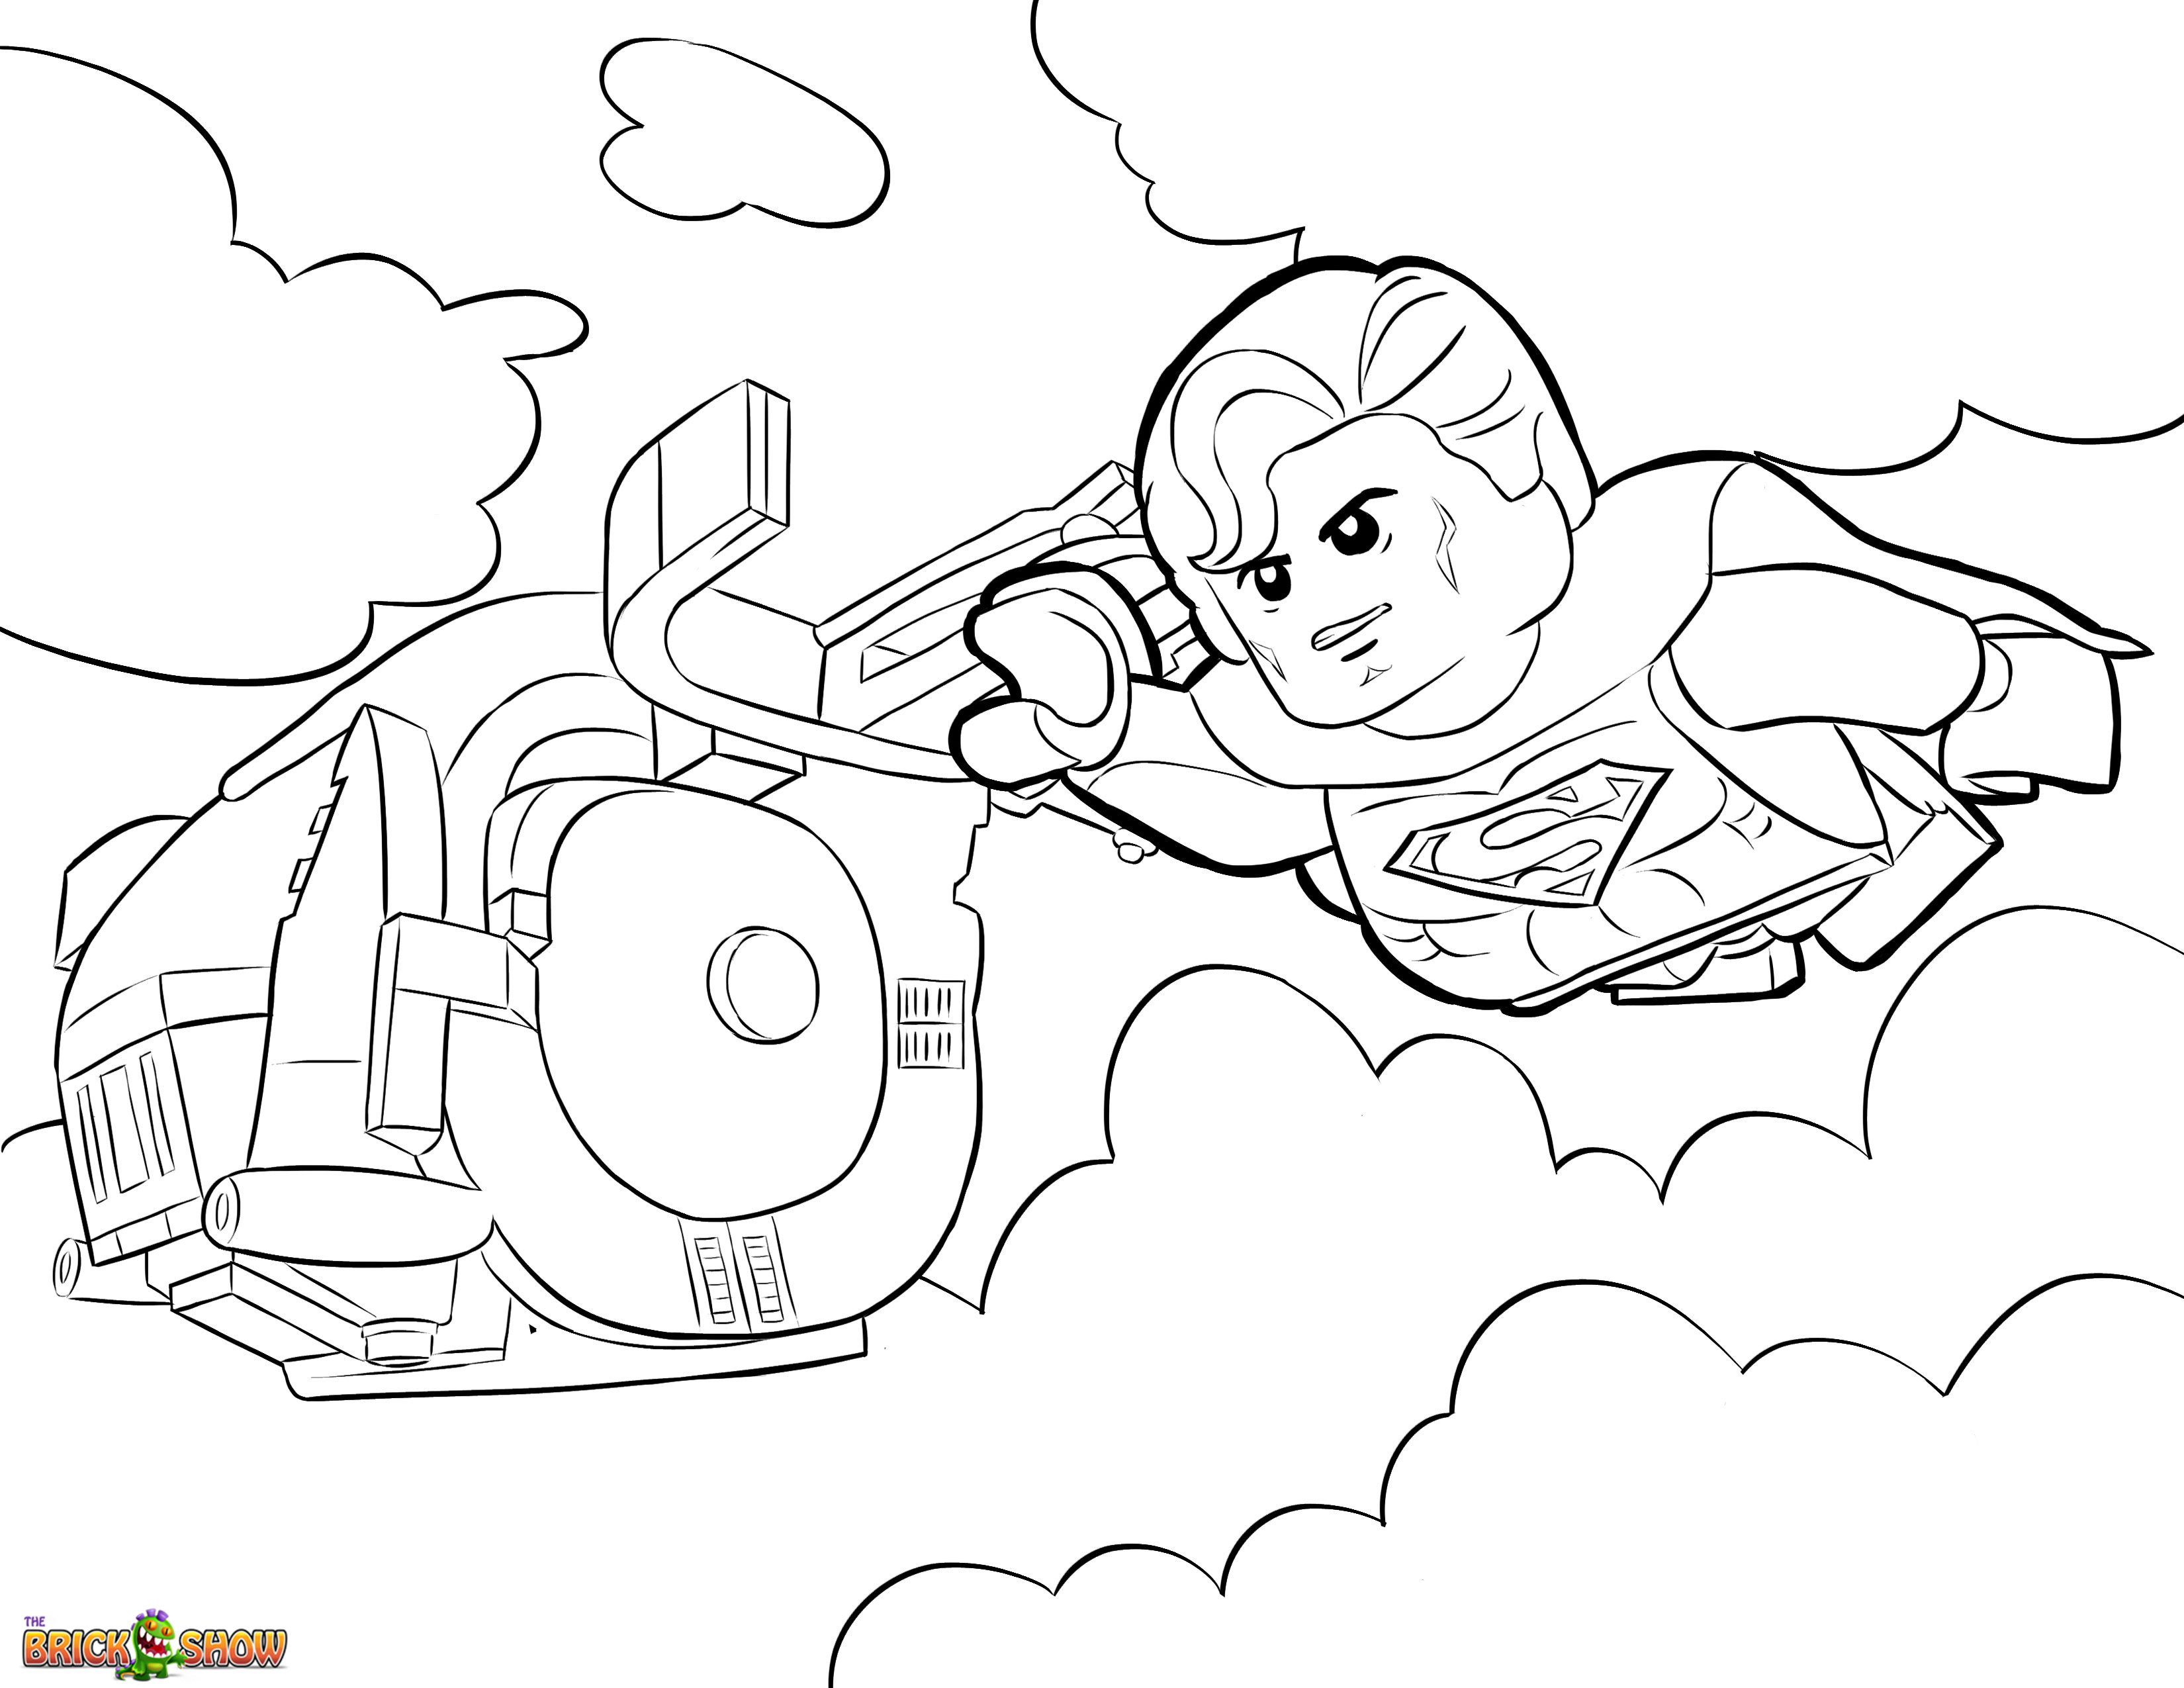 get-this-printable-superman-coloring-pages-online-28878